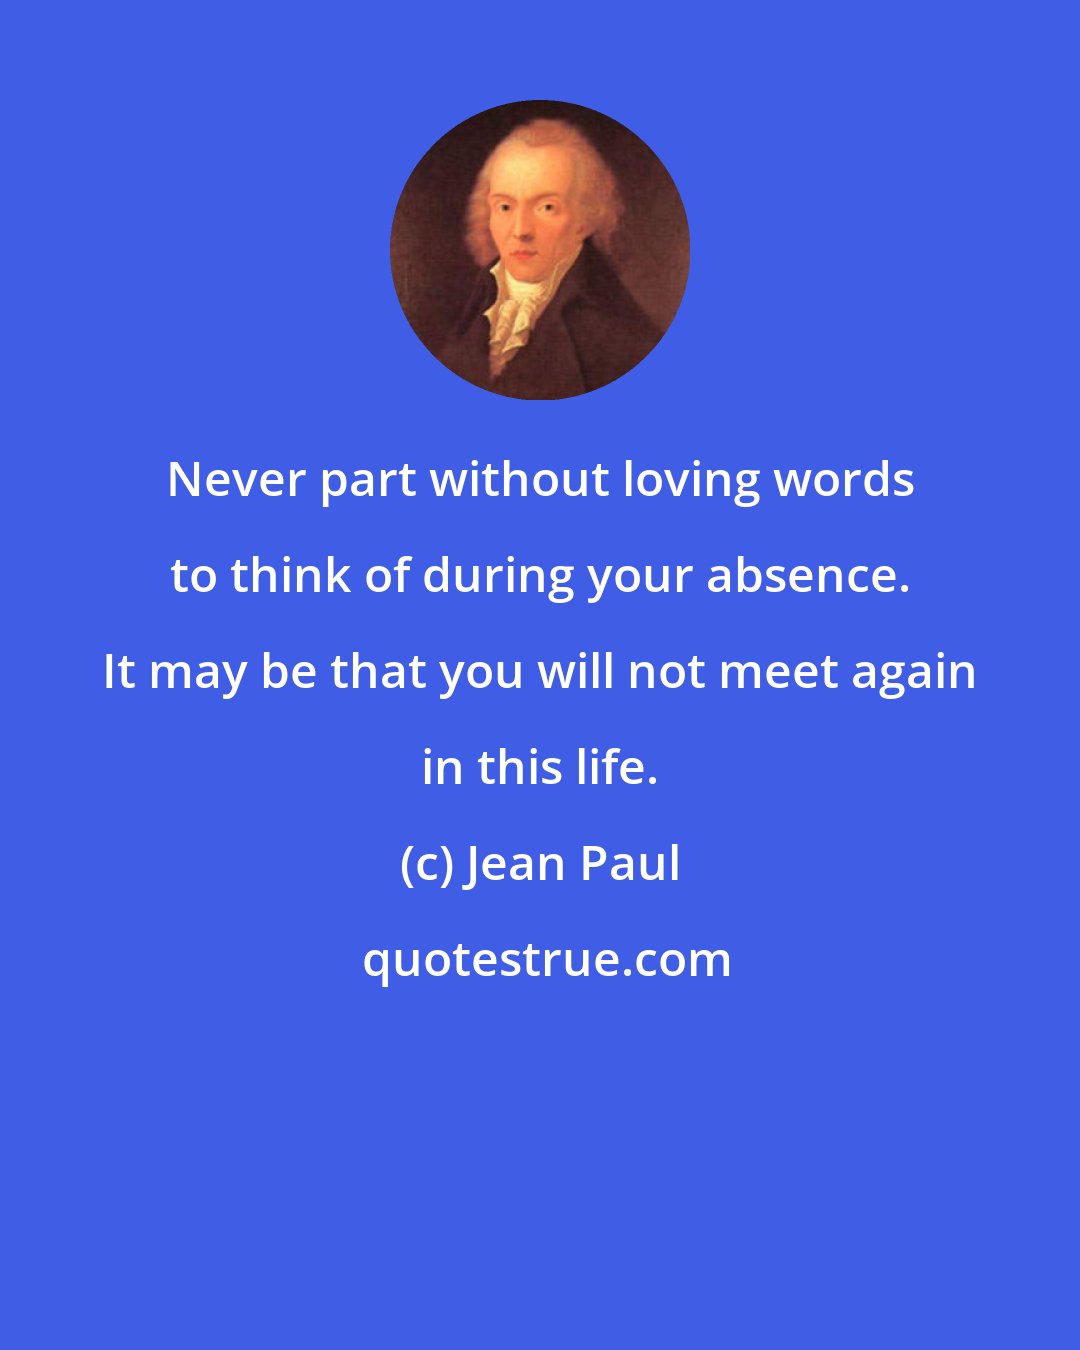 Jean Paul: Never part without loving words to think of during your absence. It may be that you will not meet again in this life.